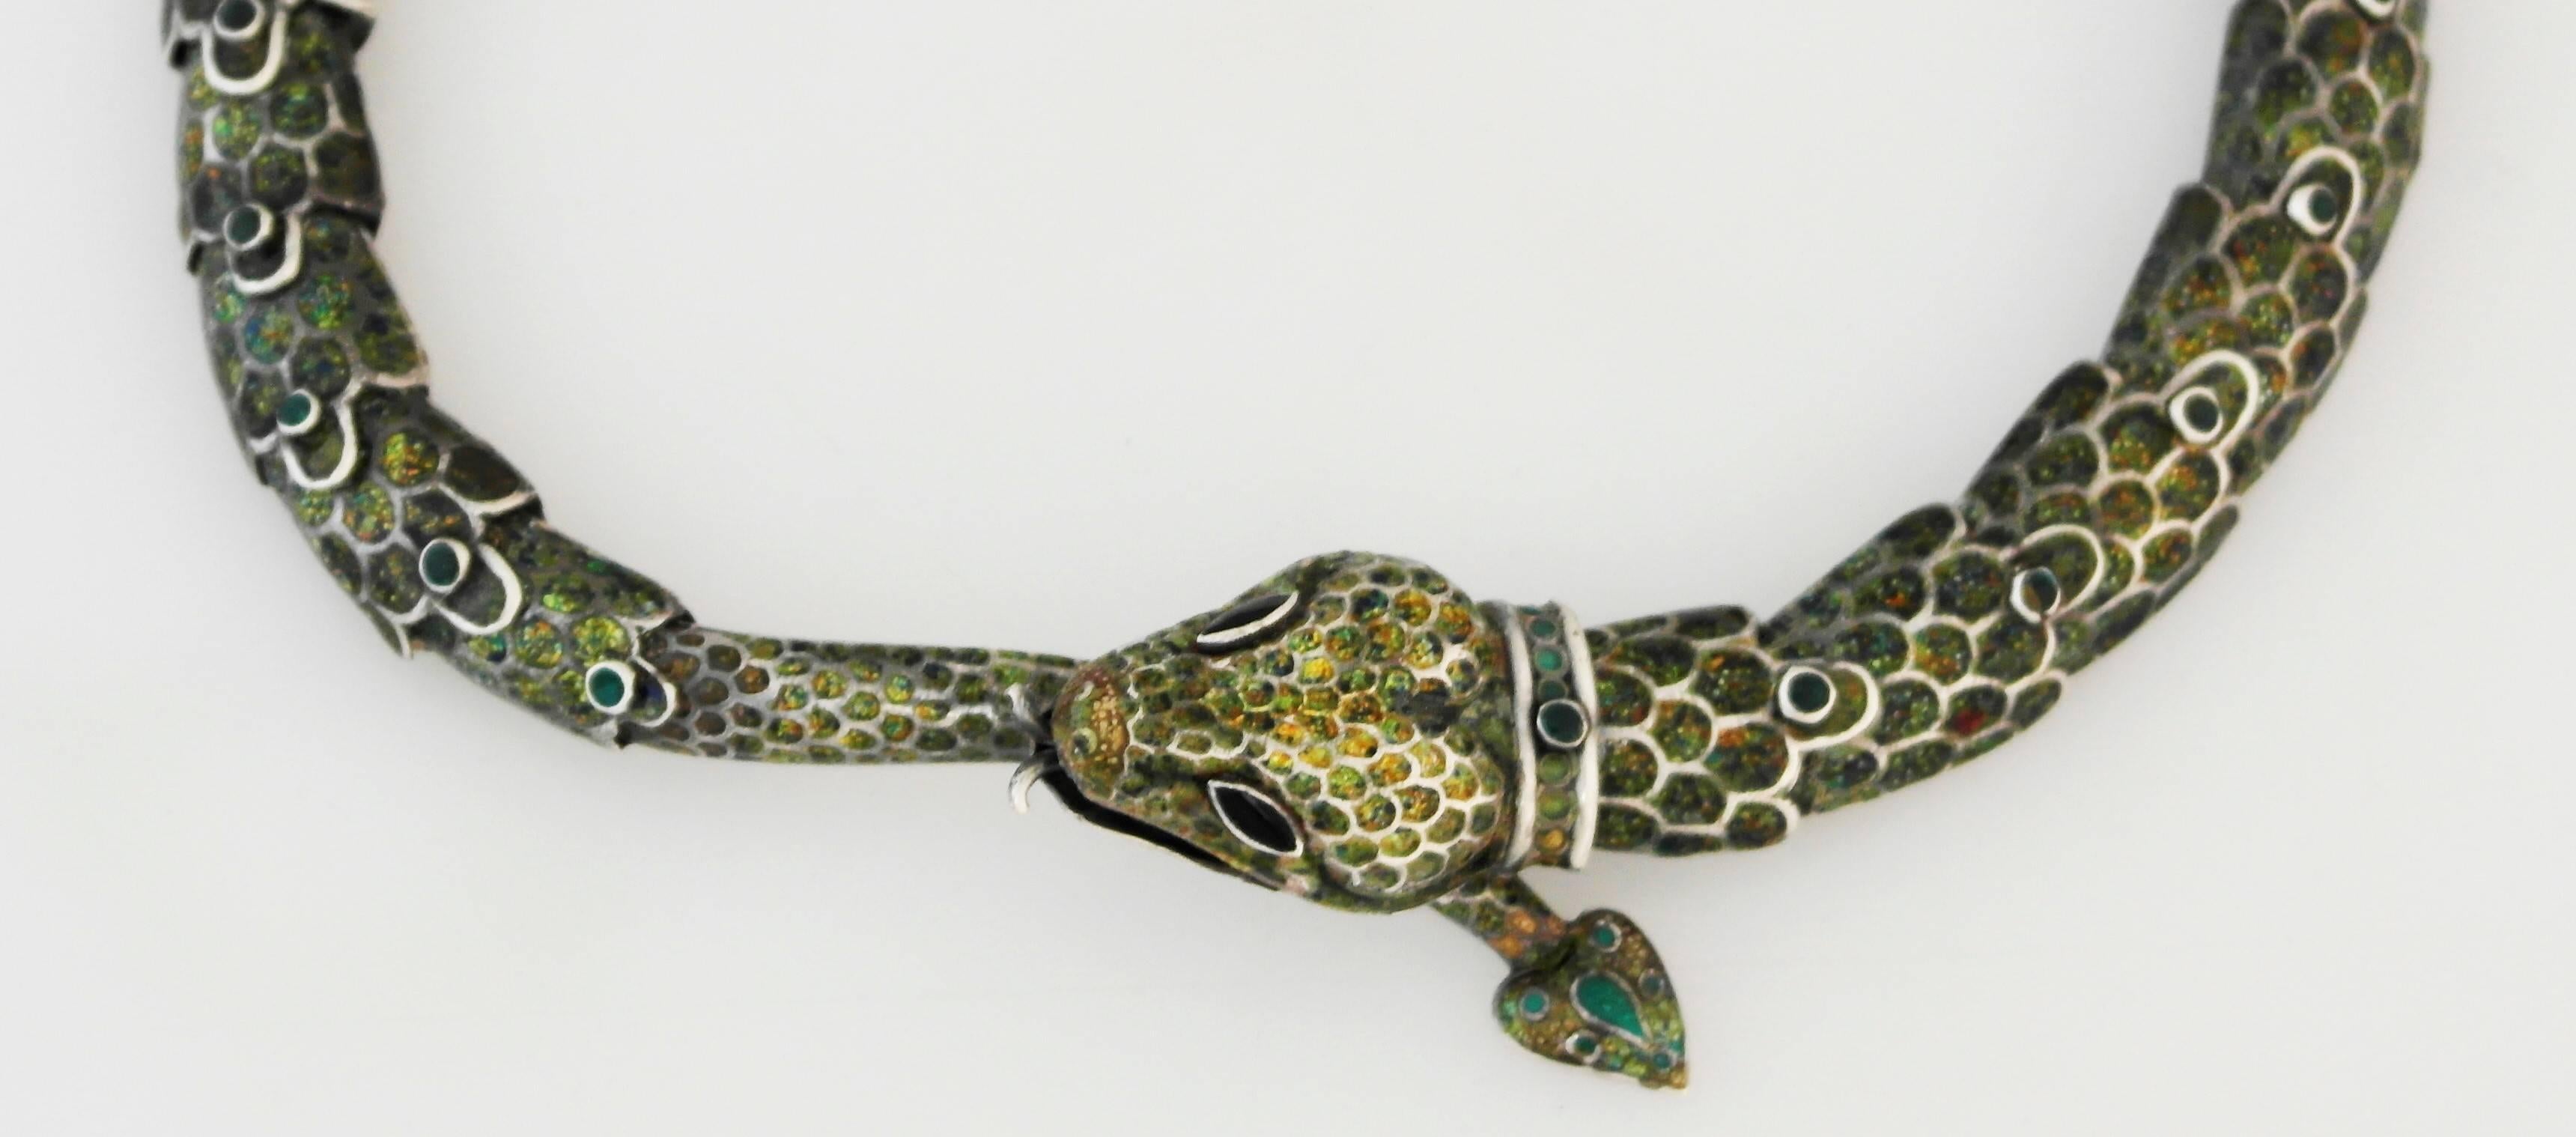 Being offered is a sterling silver necklace by Margot Van Voorhies Carr of Taxco, Mexico. Comprising a necklace in her snake motif, articulated in a spectrum of iridescent colors. Dimensions: Necklace - 14 1/2